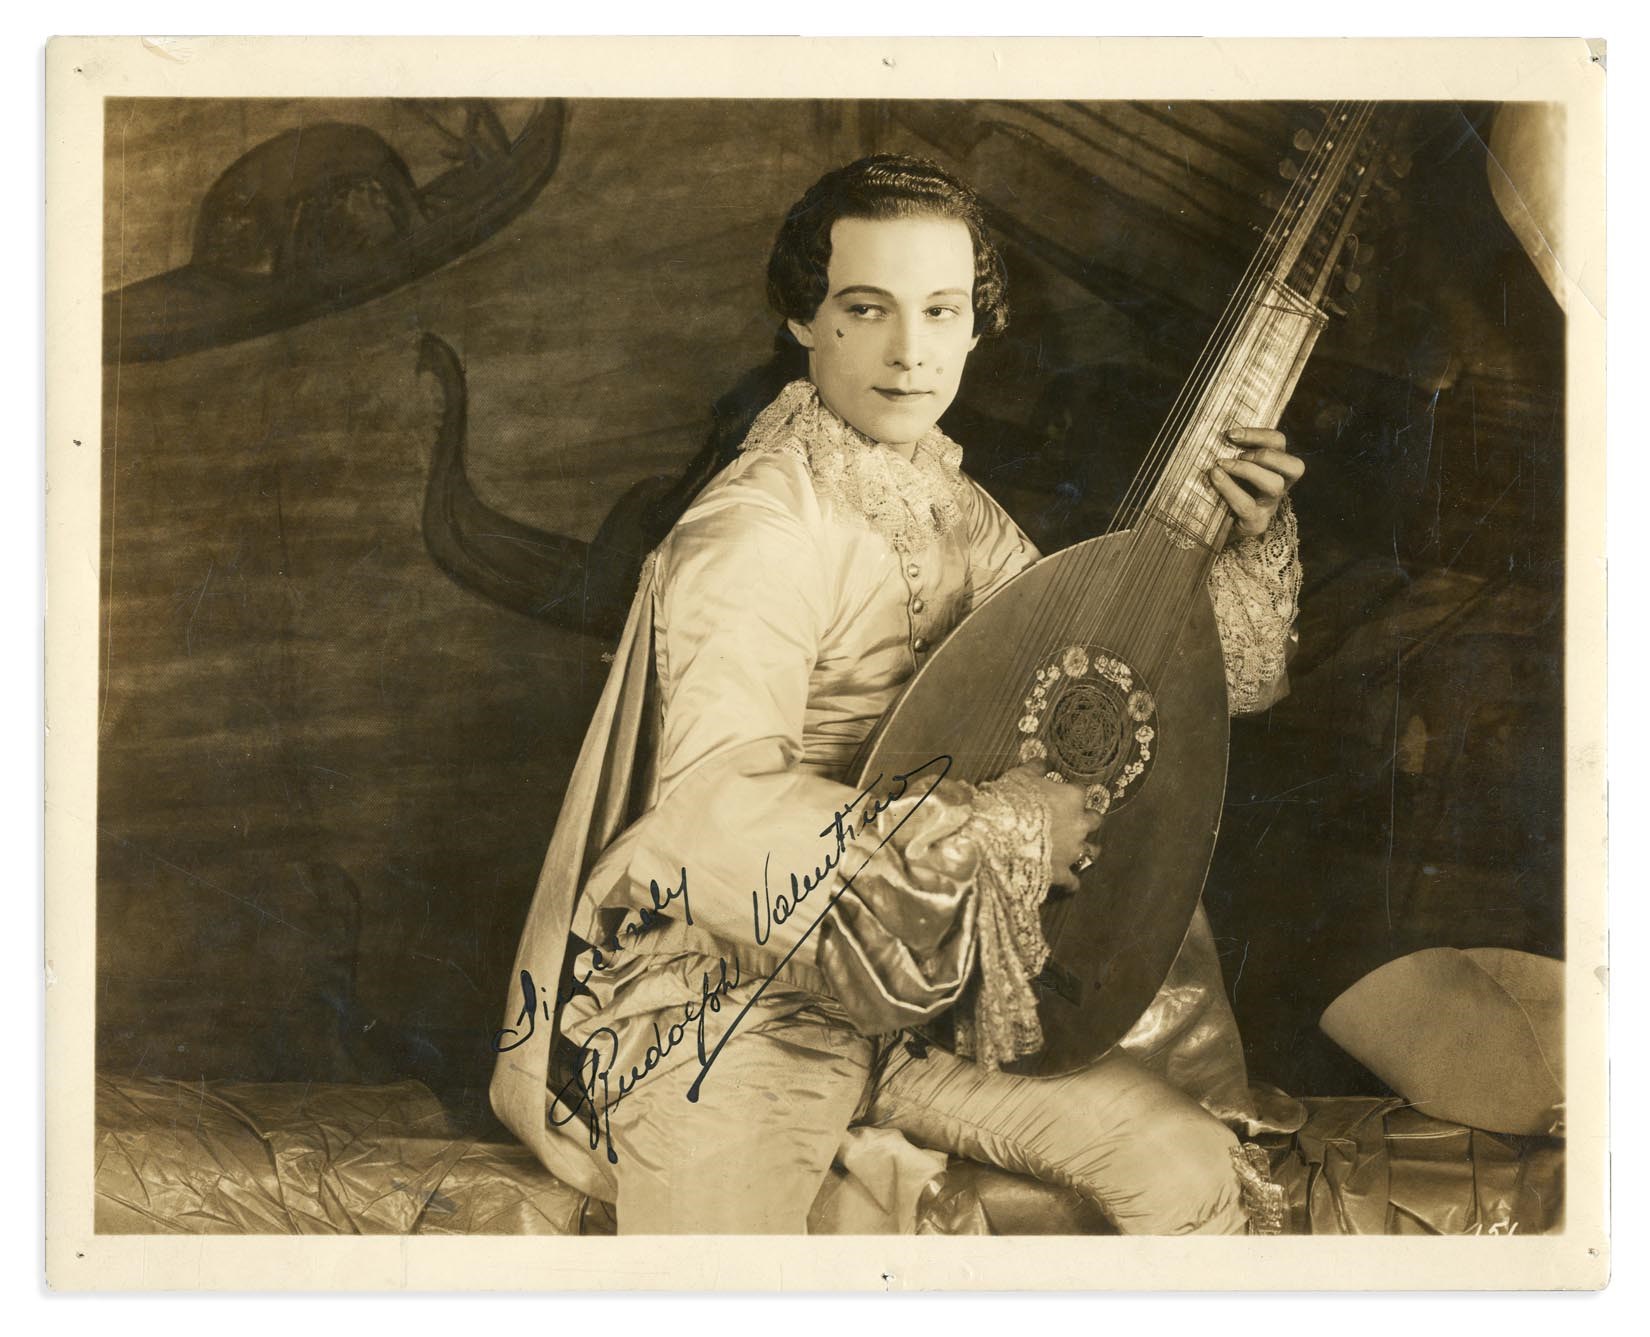 - Exceptional Rudolph Valentino Signed Photograph